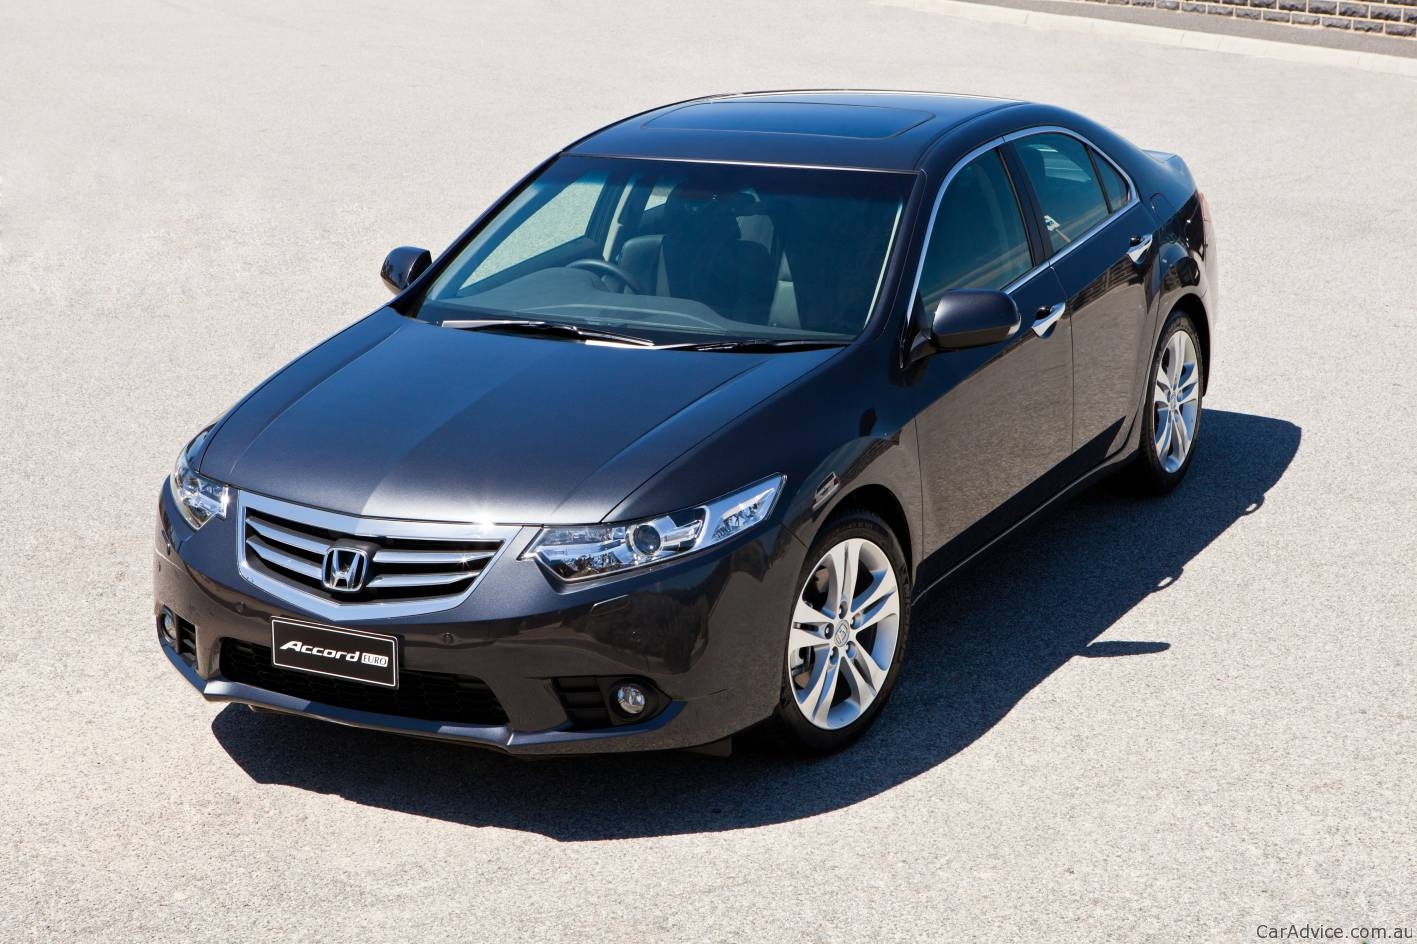 Honda accord best selling car in what country #3